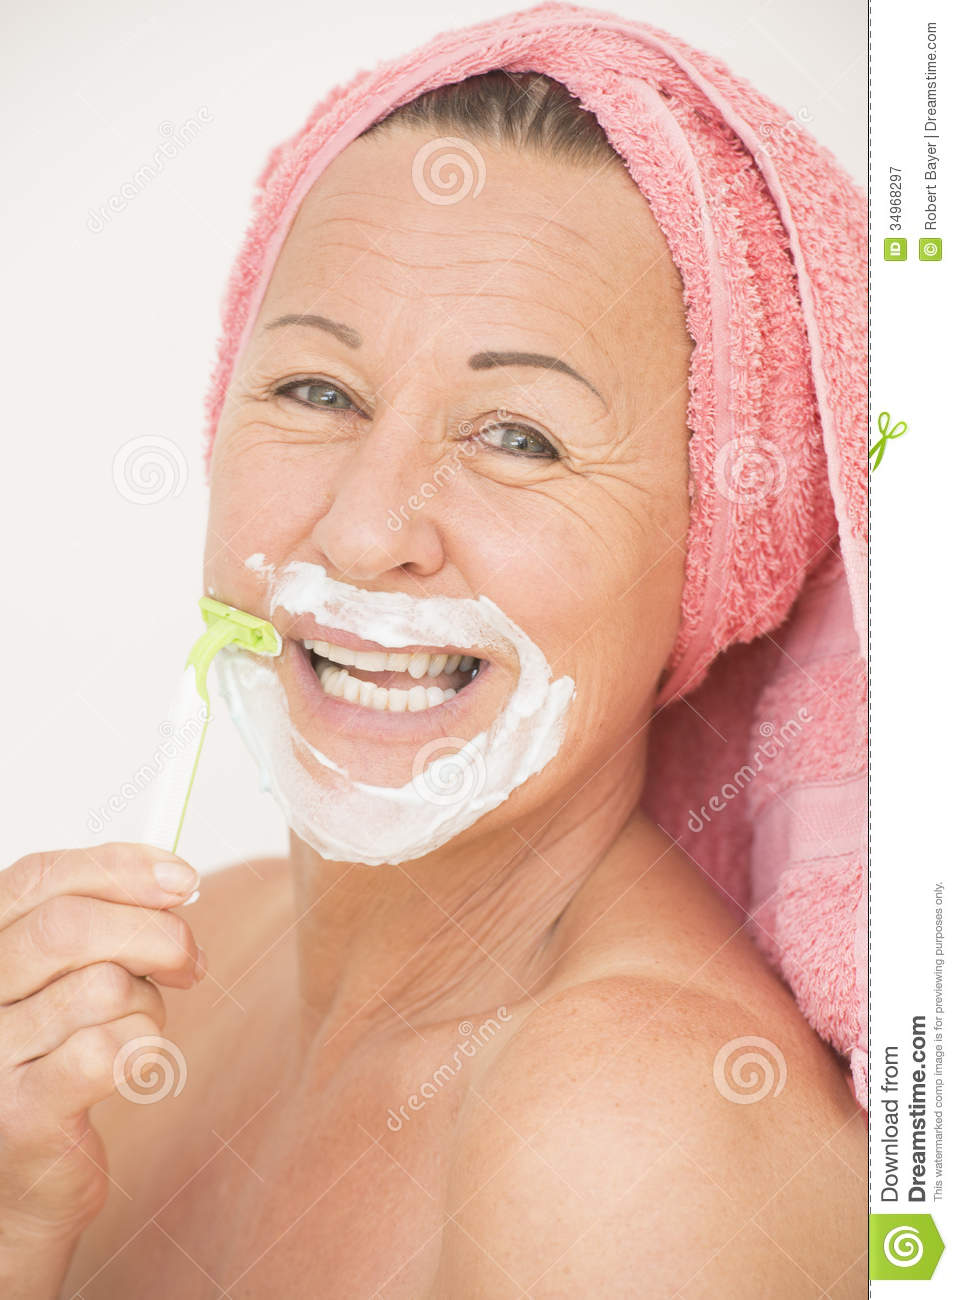 Woman With Razor Shaving Face Funny Image